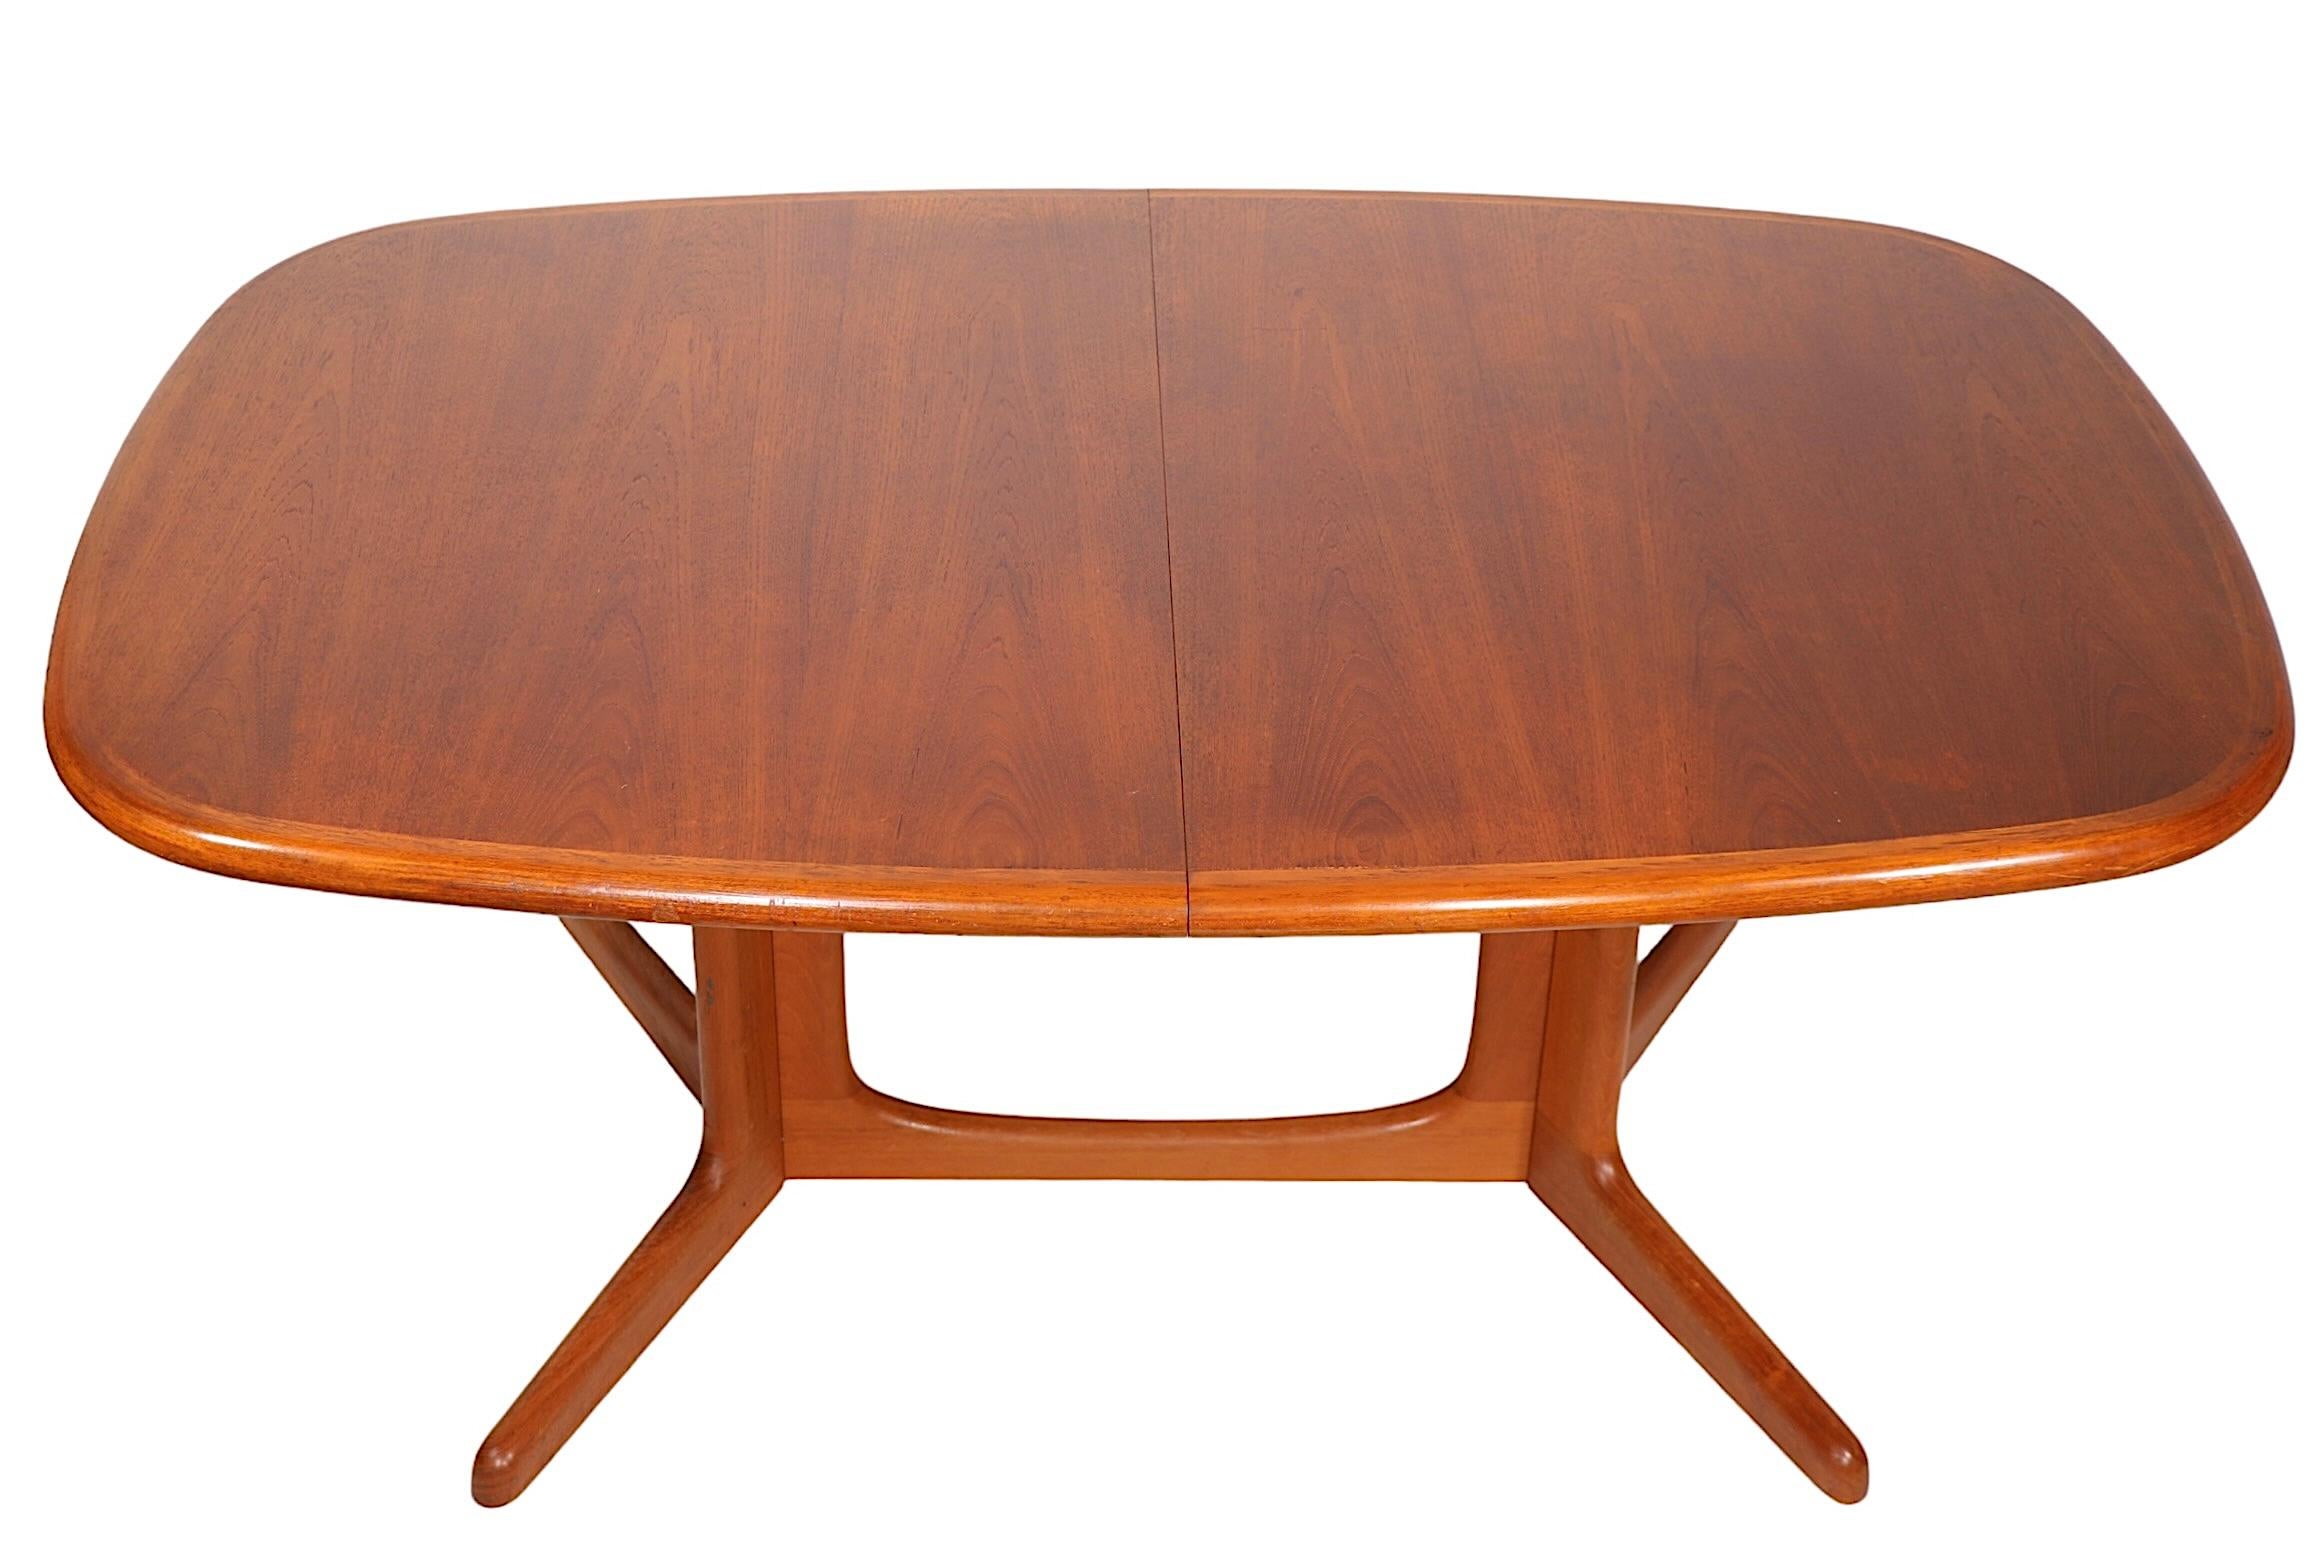 Danish Mid Century Oval Teak Dining Table by Niels Otto Moller for Gudme c 1970s For Sale 1